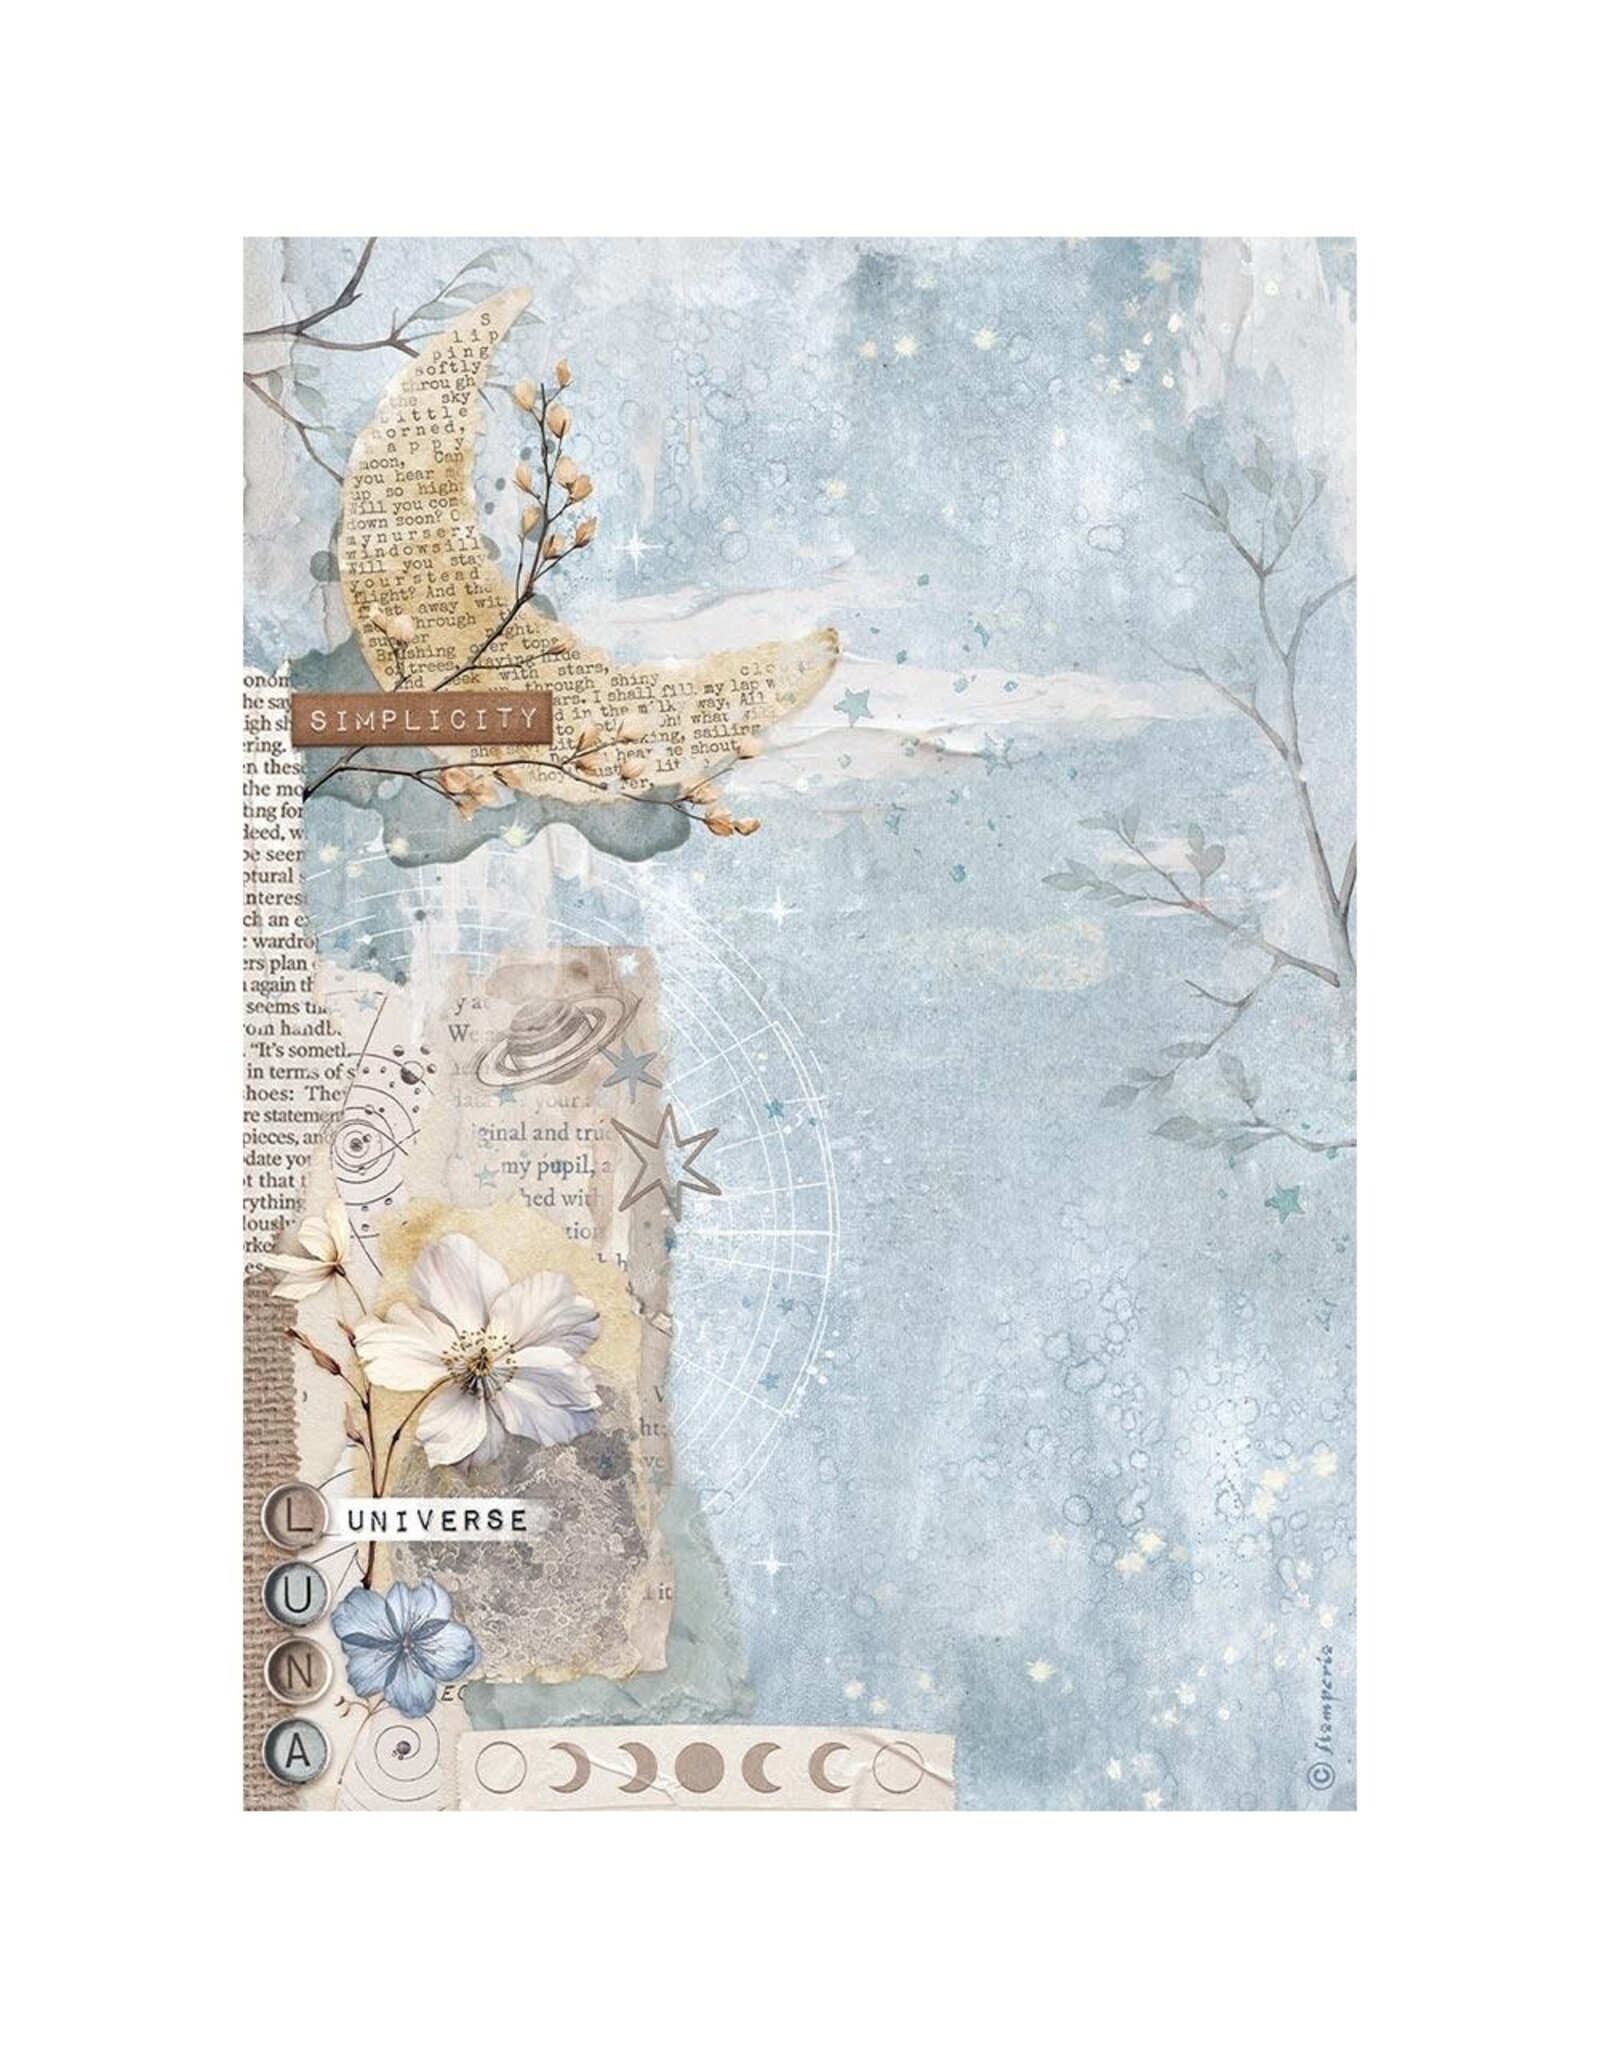 STAMPERIA STAMPERIA VICKY PAPAIOANNOU CREATE HAPPINESS SECRET DIARY ASSORTED A4 RICE PAPER DECOUPAGE 21X29.7CM 6/PK